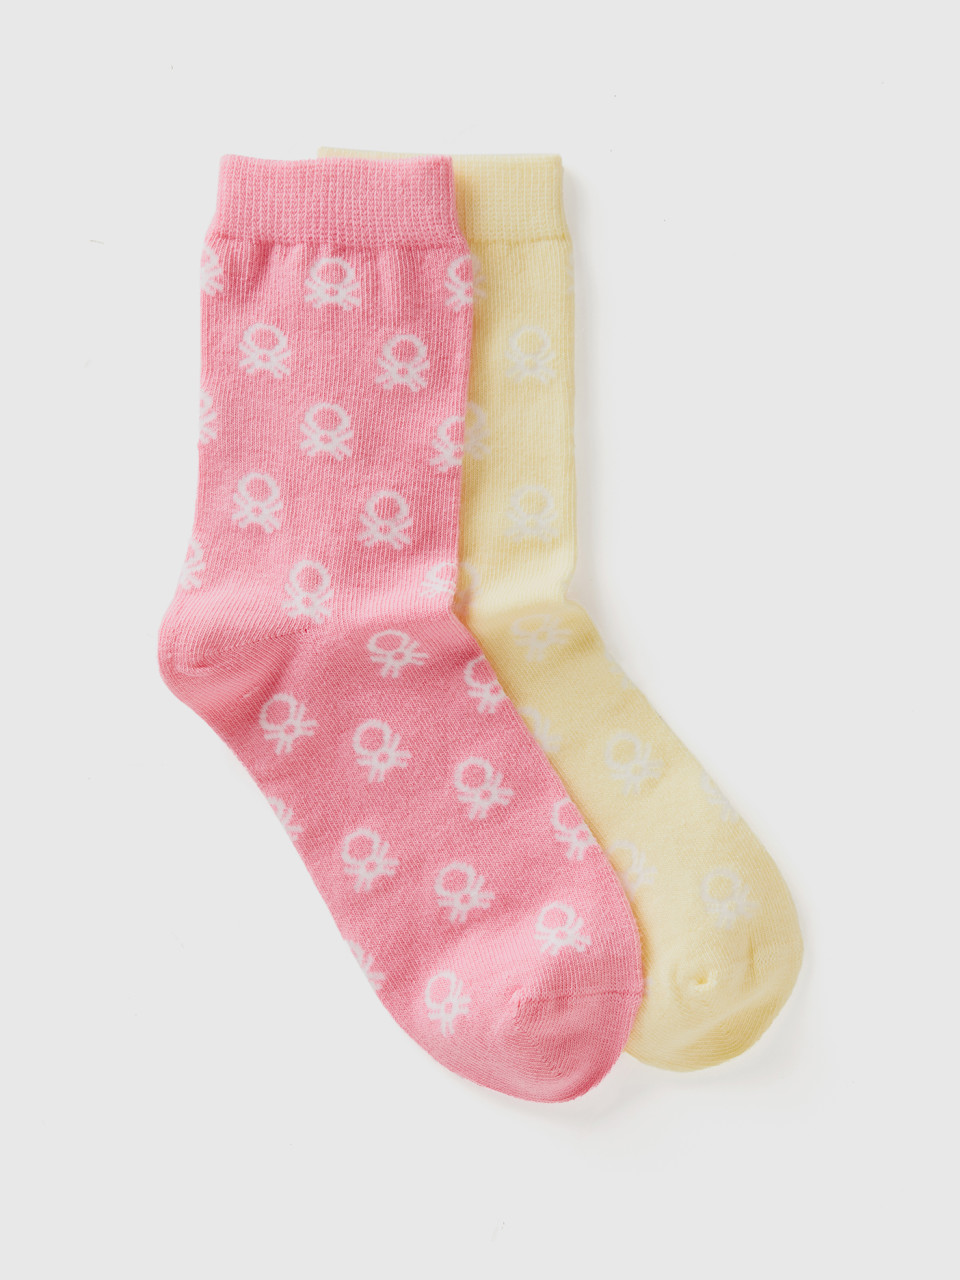 Benetton, Two Pairs Of Long Yellow And Pink Socks, Multi-color, Kids